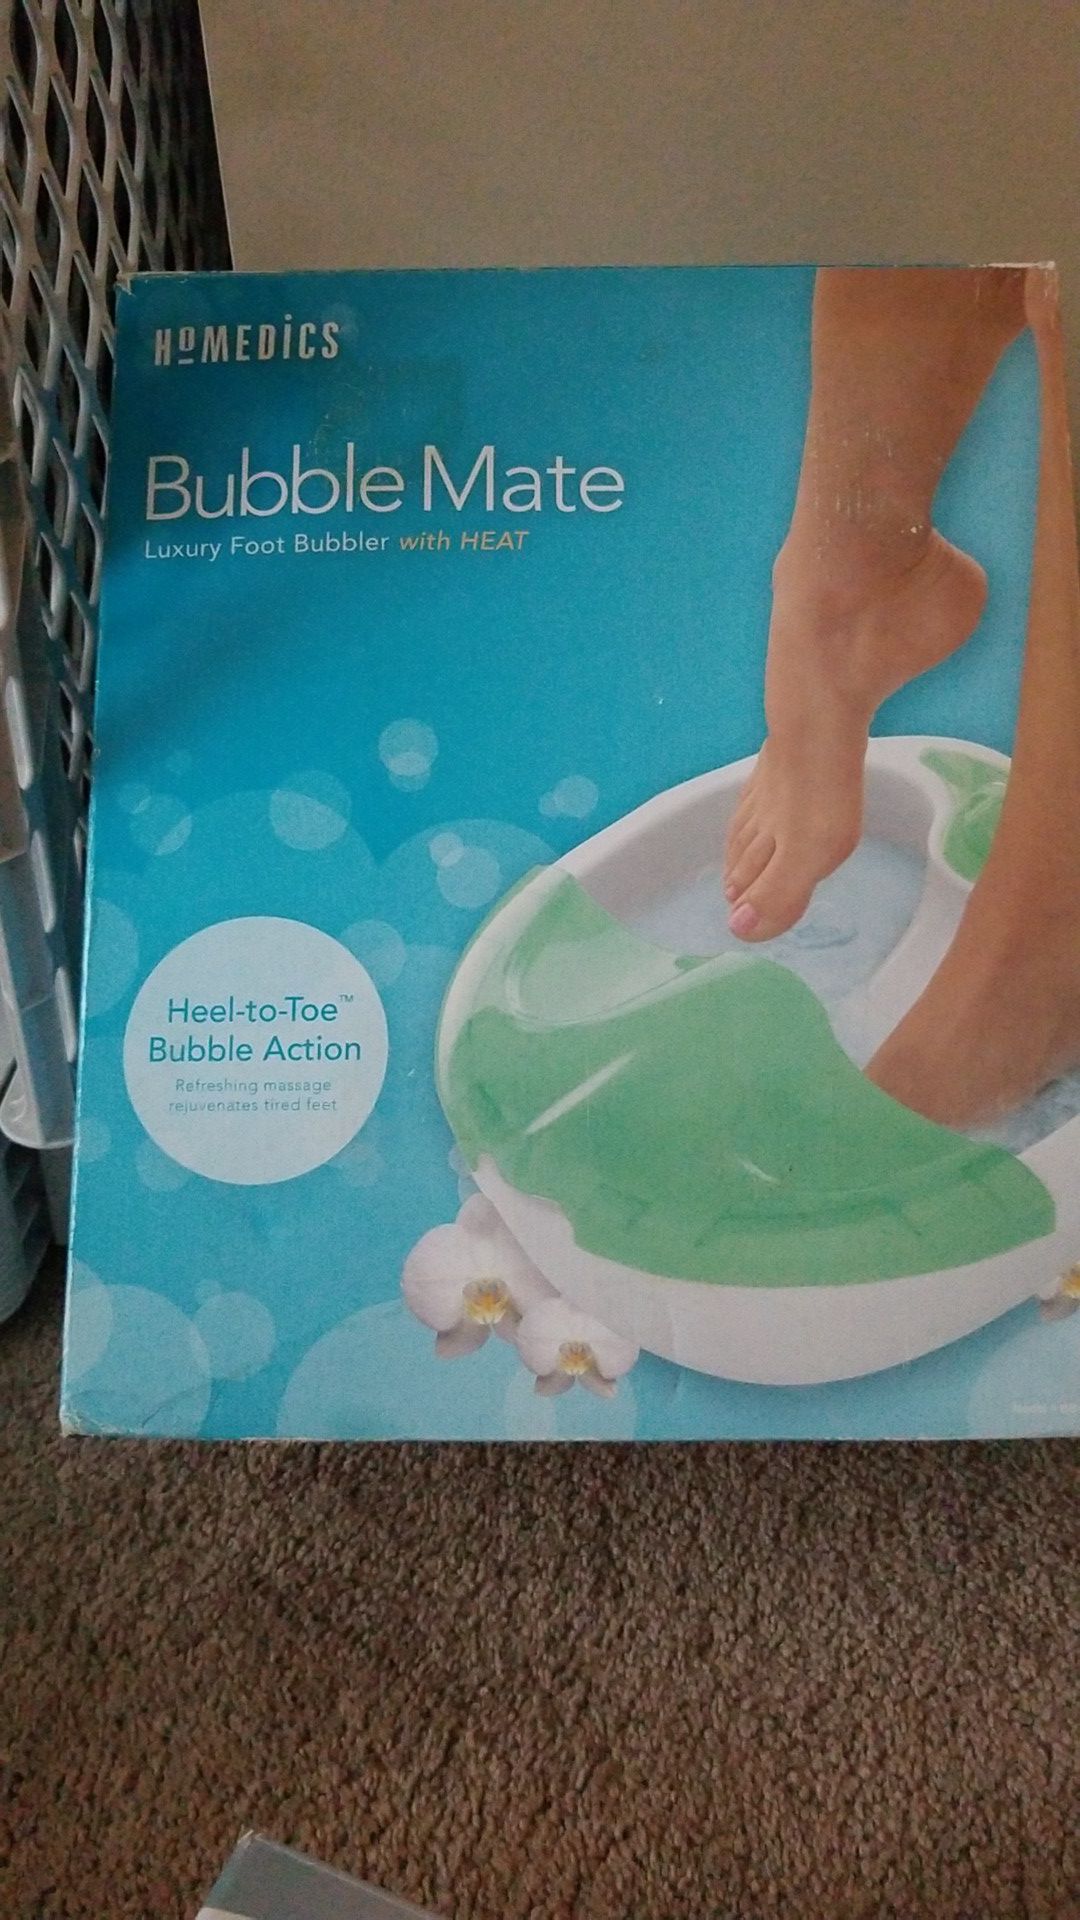 Bubble mate luxury foot bubbler with heat